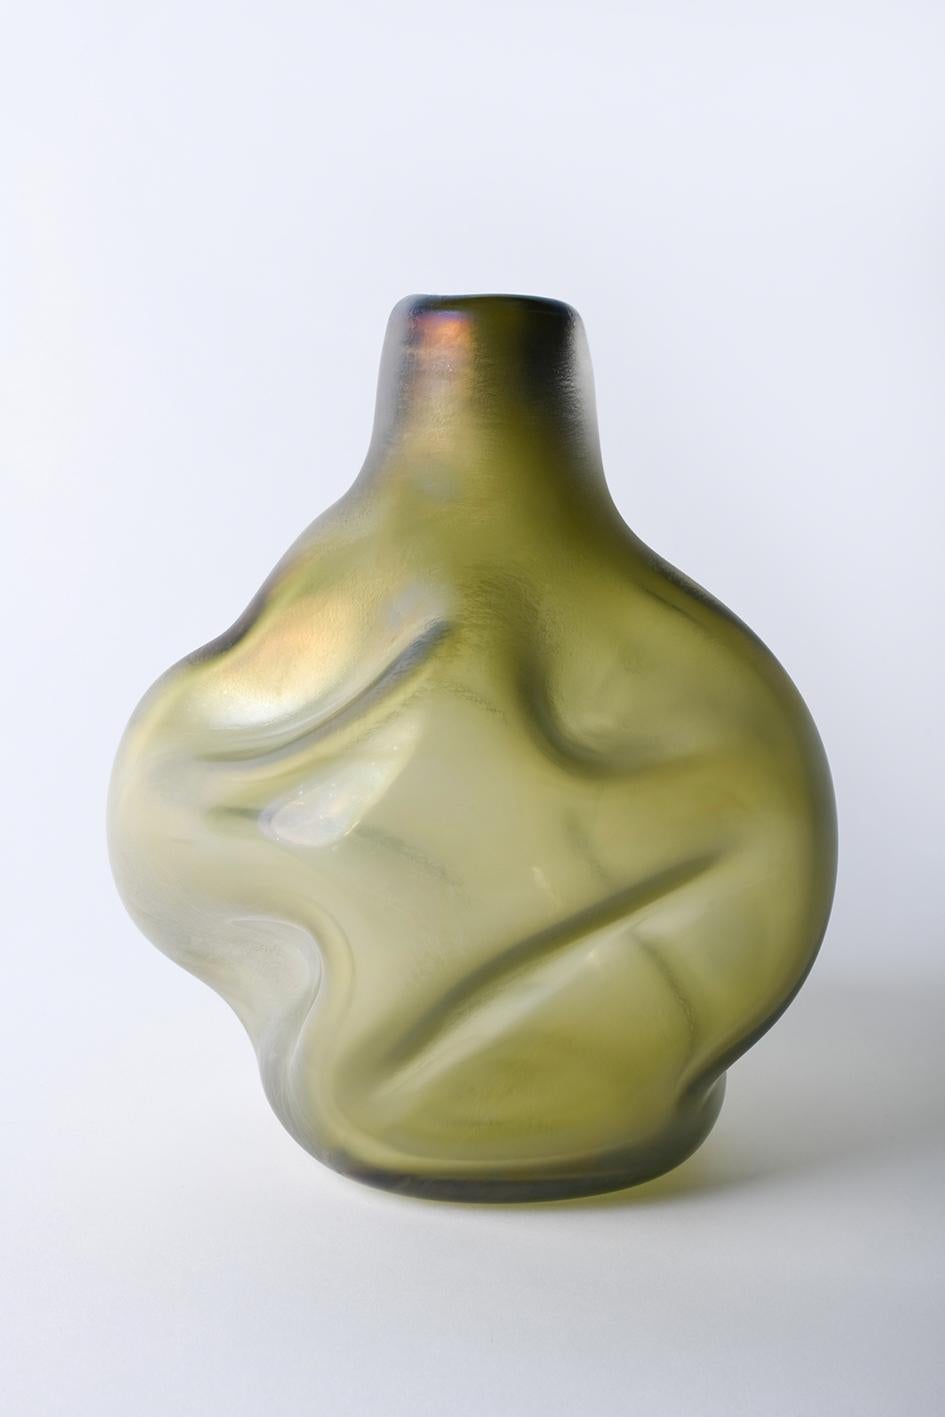 Caigo Small is a vase from the Laguna Collection designed by Ludovica+Roberto Palomba for Purho in spring 2022. Mignon version of the larger Caigo — which name refers to the thick fog in the Venetian dialect — this small vase whose plump shapes